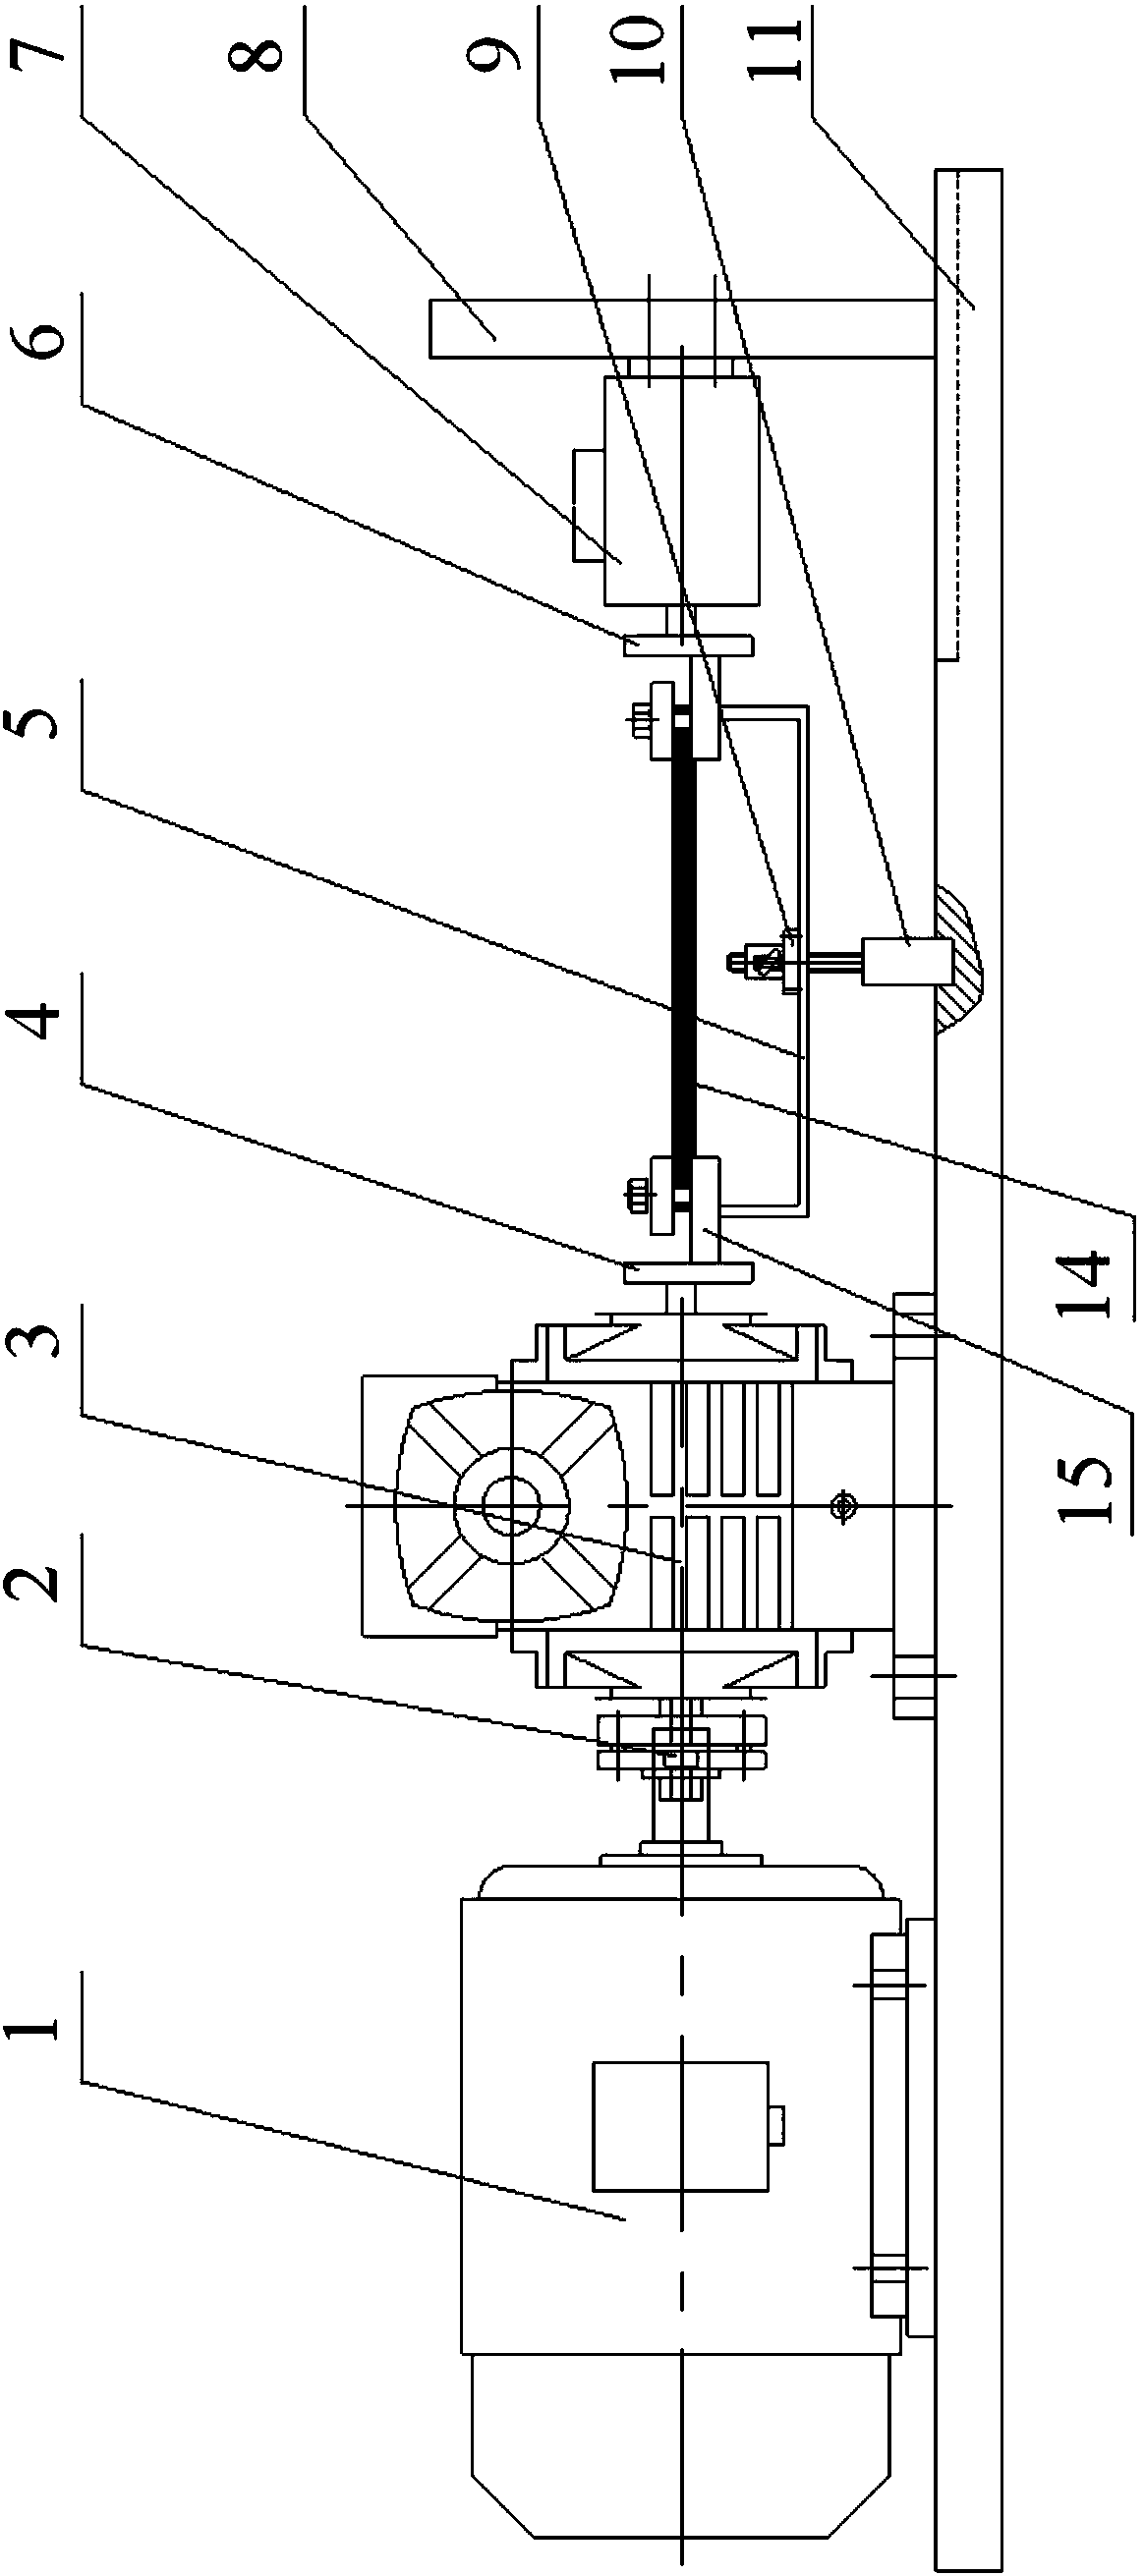 In situ torque testing device and observation device for micro-nano scale materials